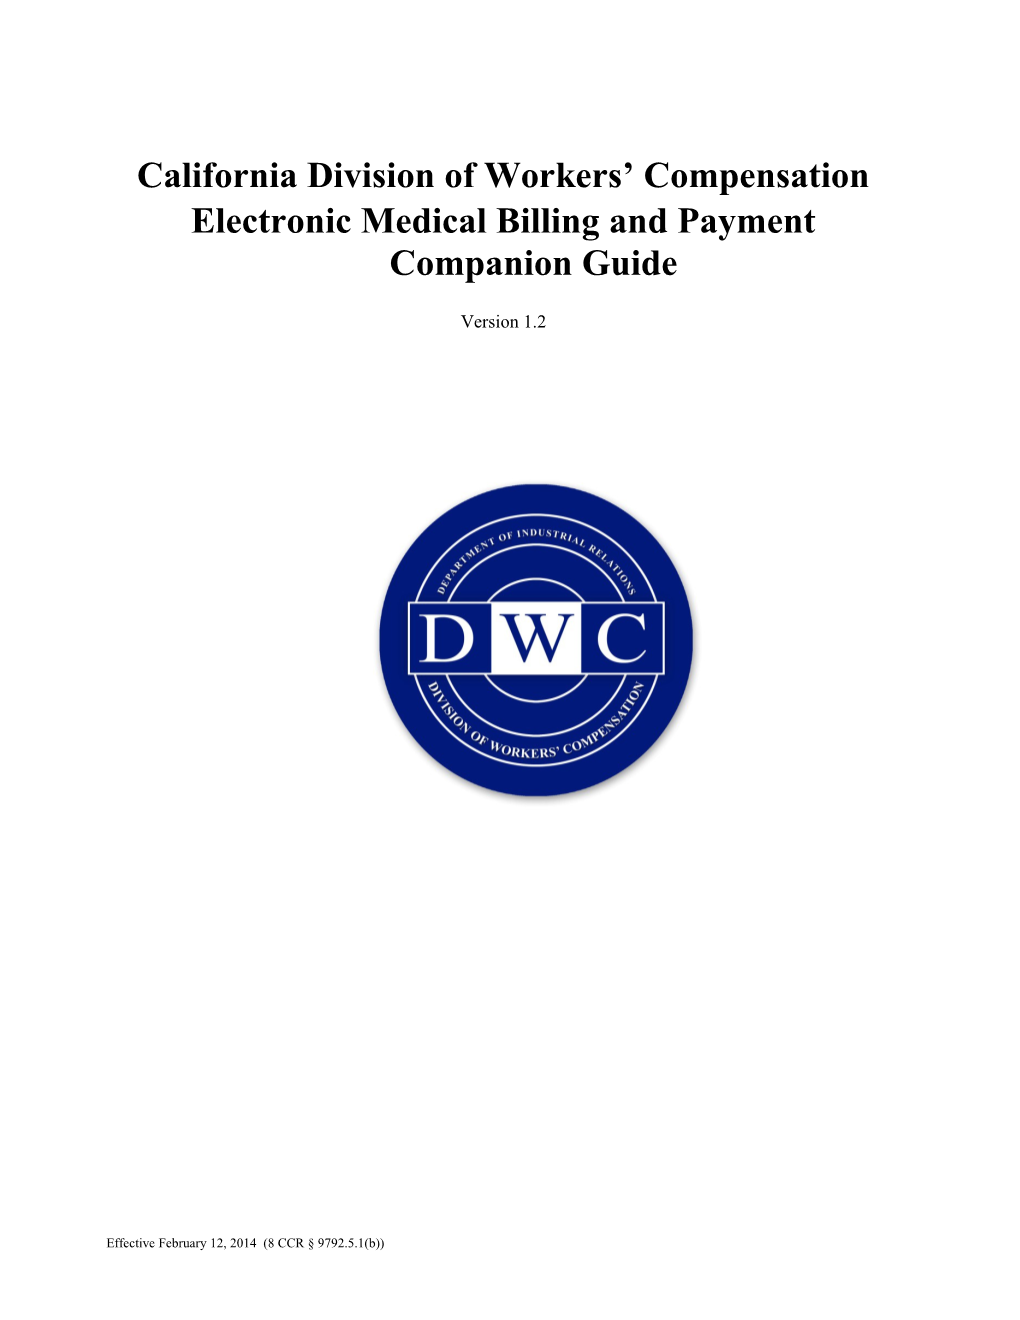 California Electronic Medical Billing and Payment Companion Guide